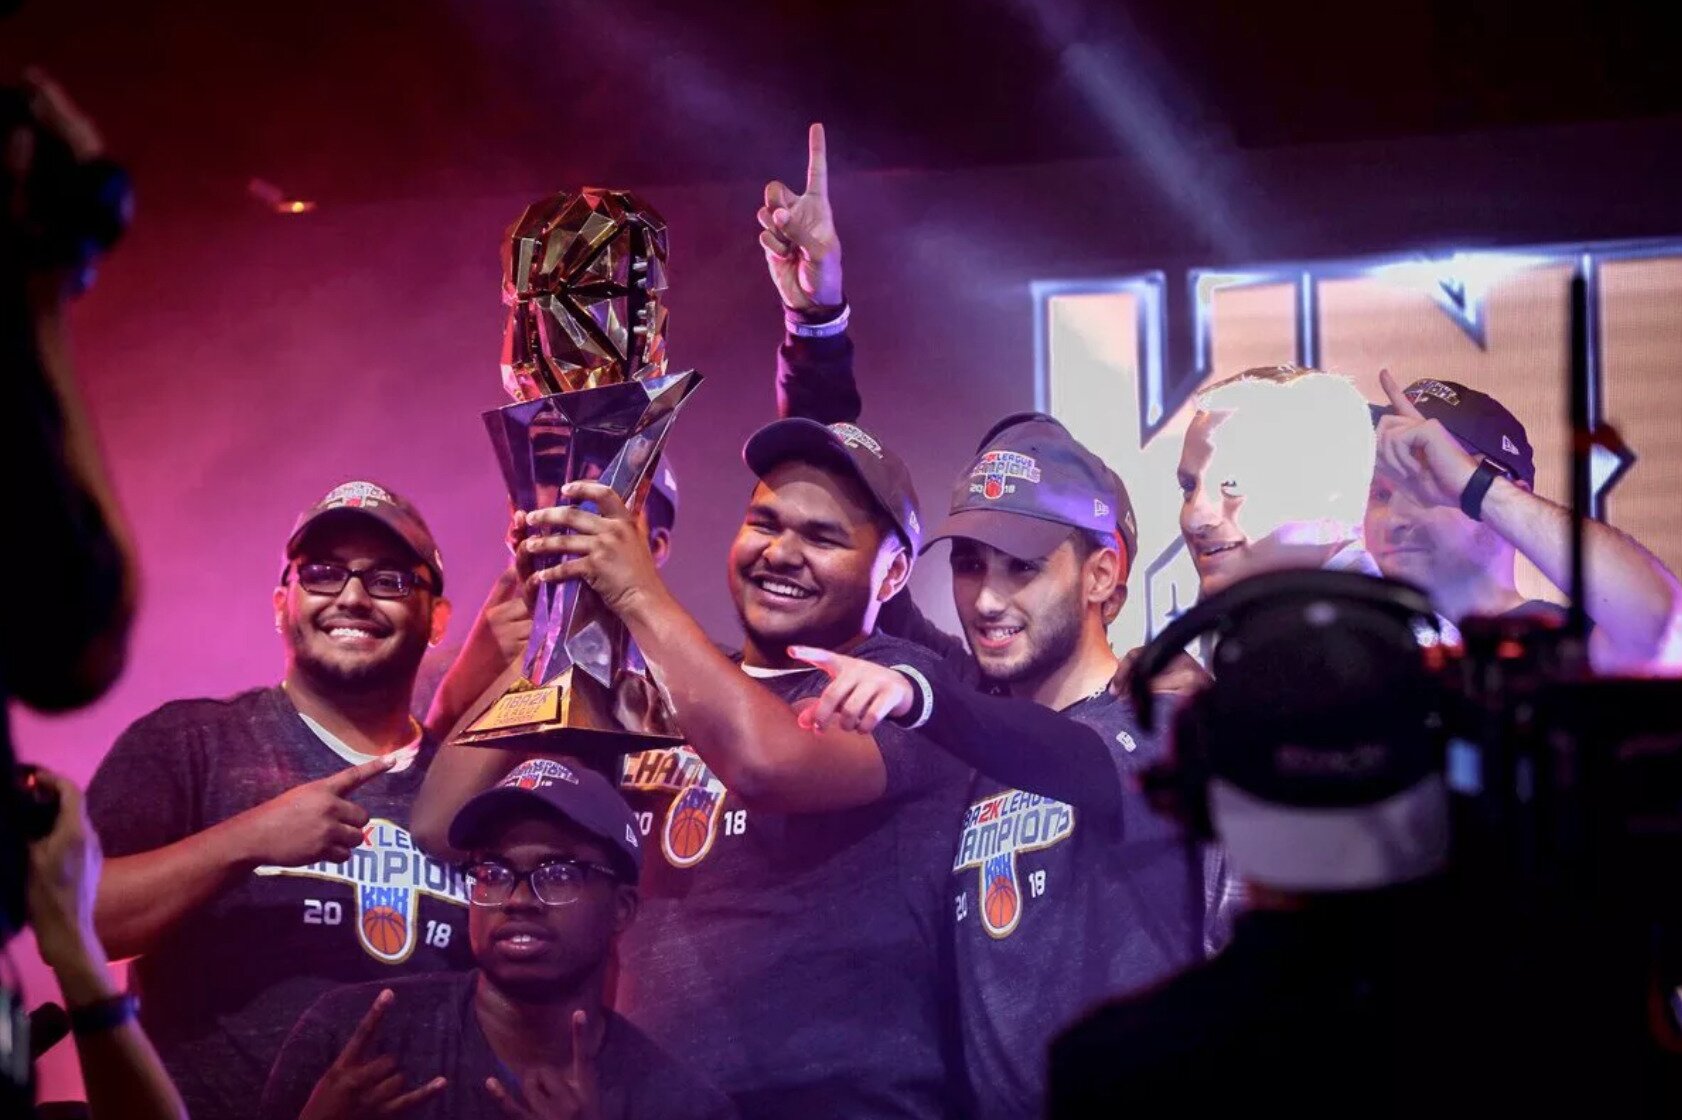 The NBA 2K League showed just how well a traditional sports league can jump right into the esports world.